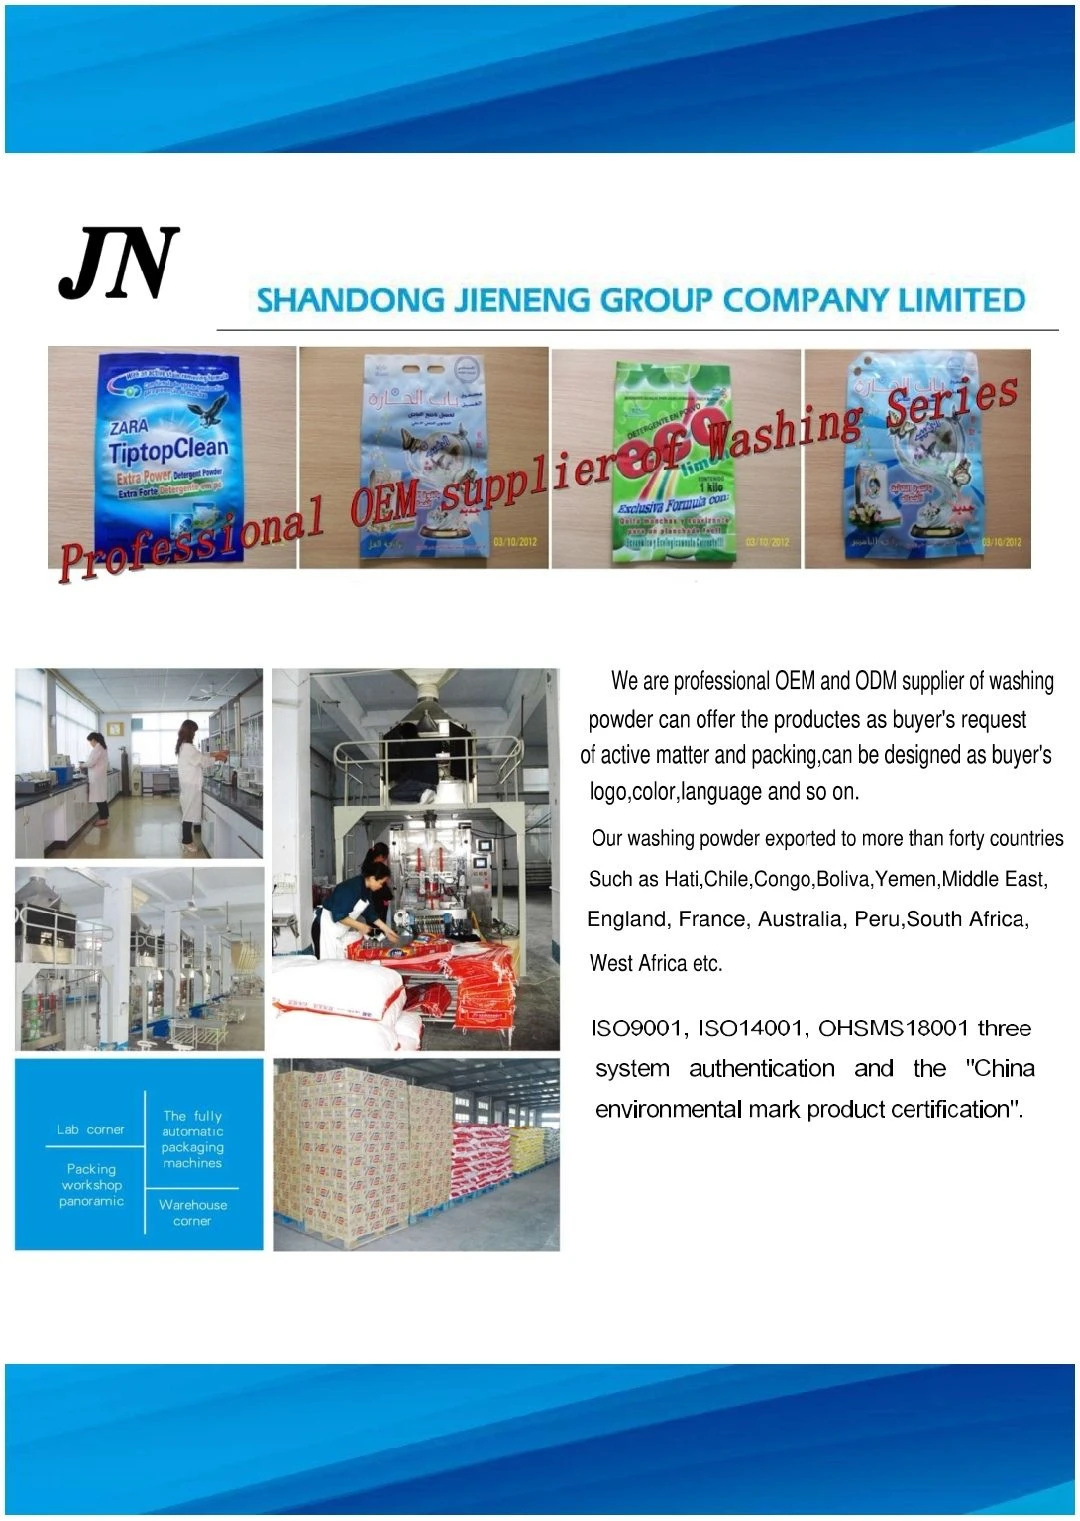 Shandong Jieneng Group Co., Limited